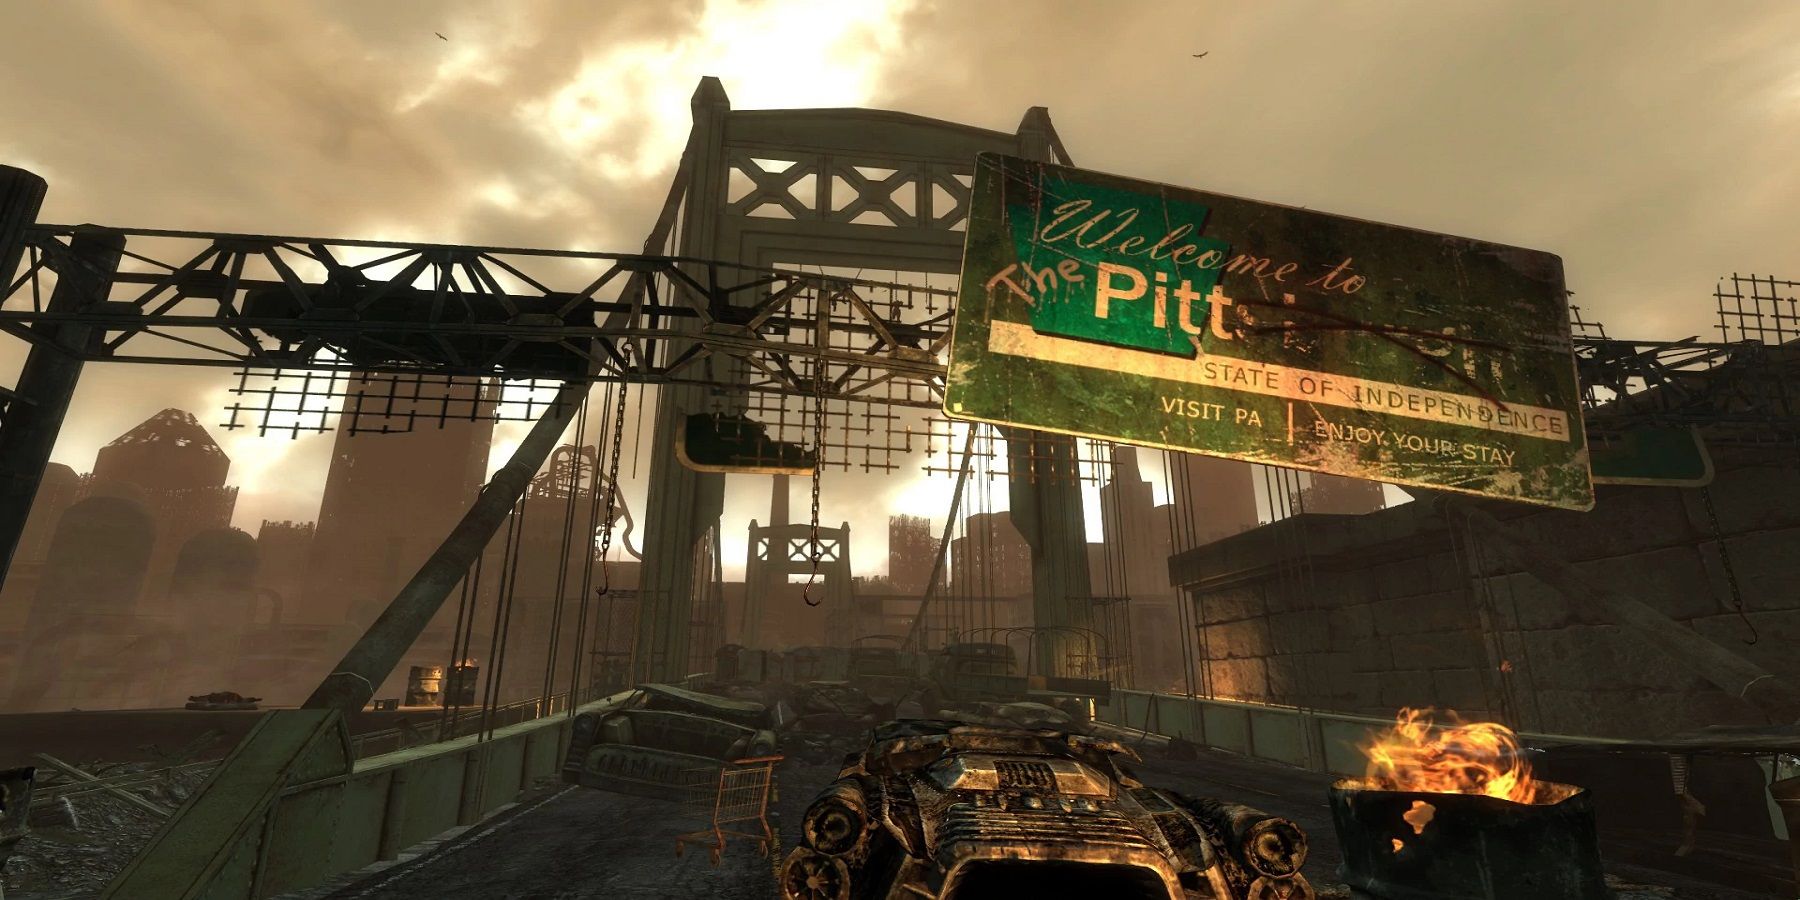 Fallout 76 players will venture into Pittsburgh's ruins in the next major content update.